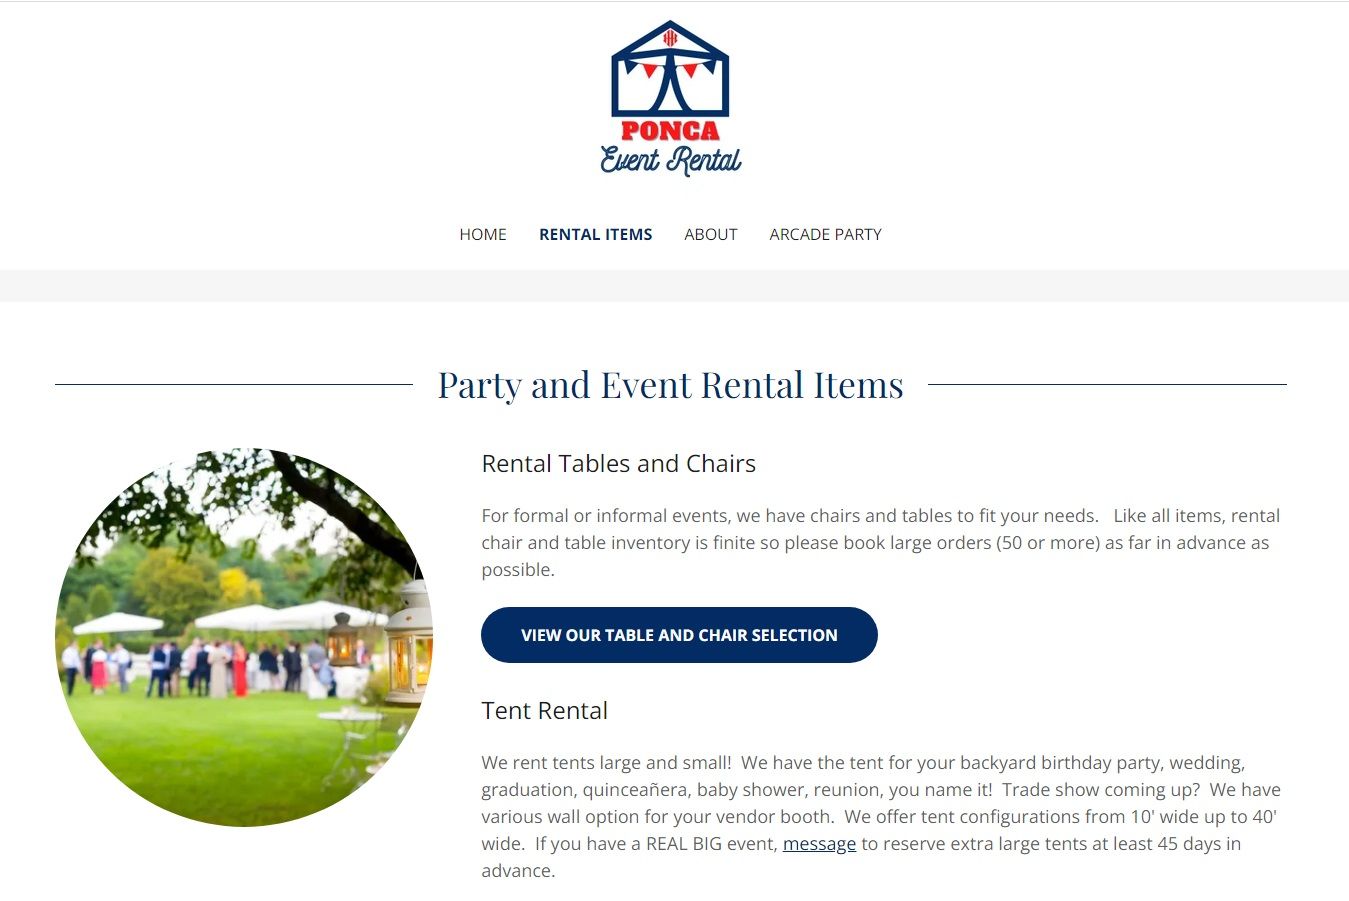 marketing a party rental business on teh internet